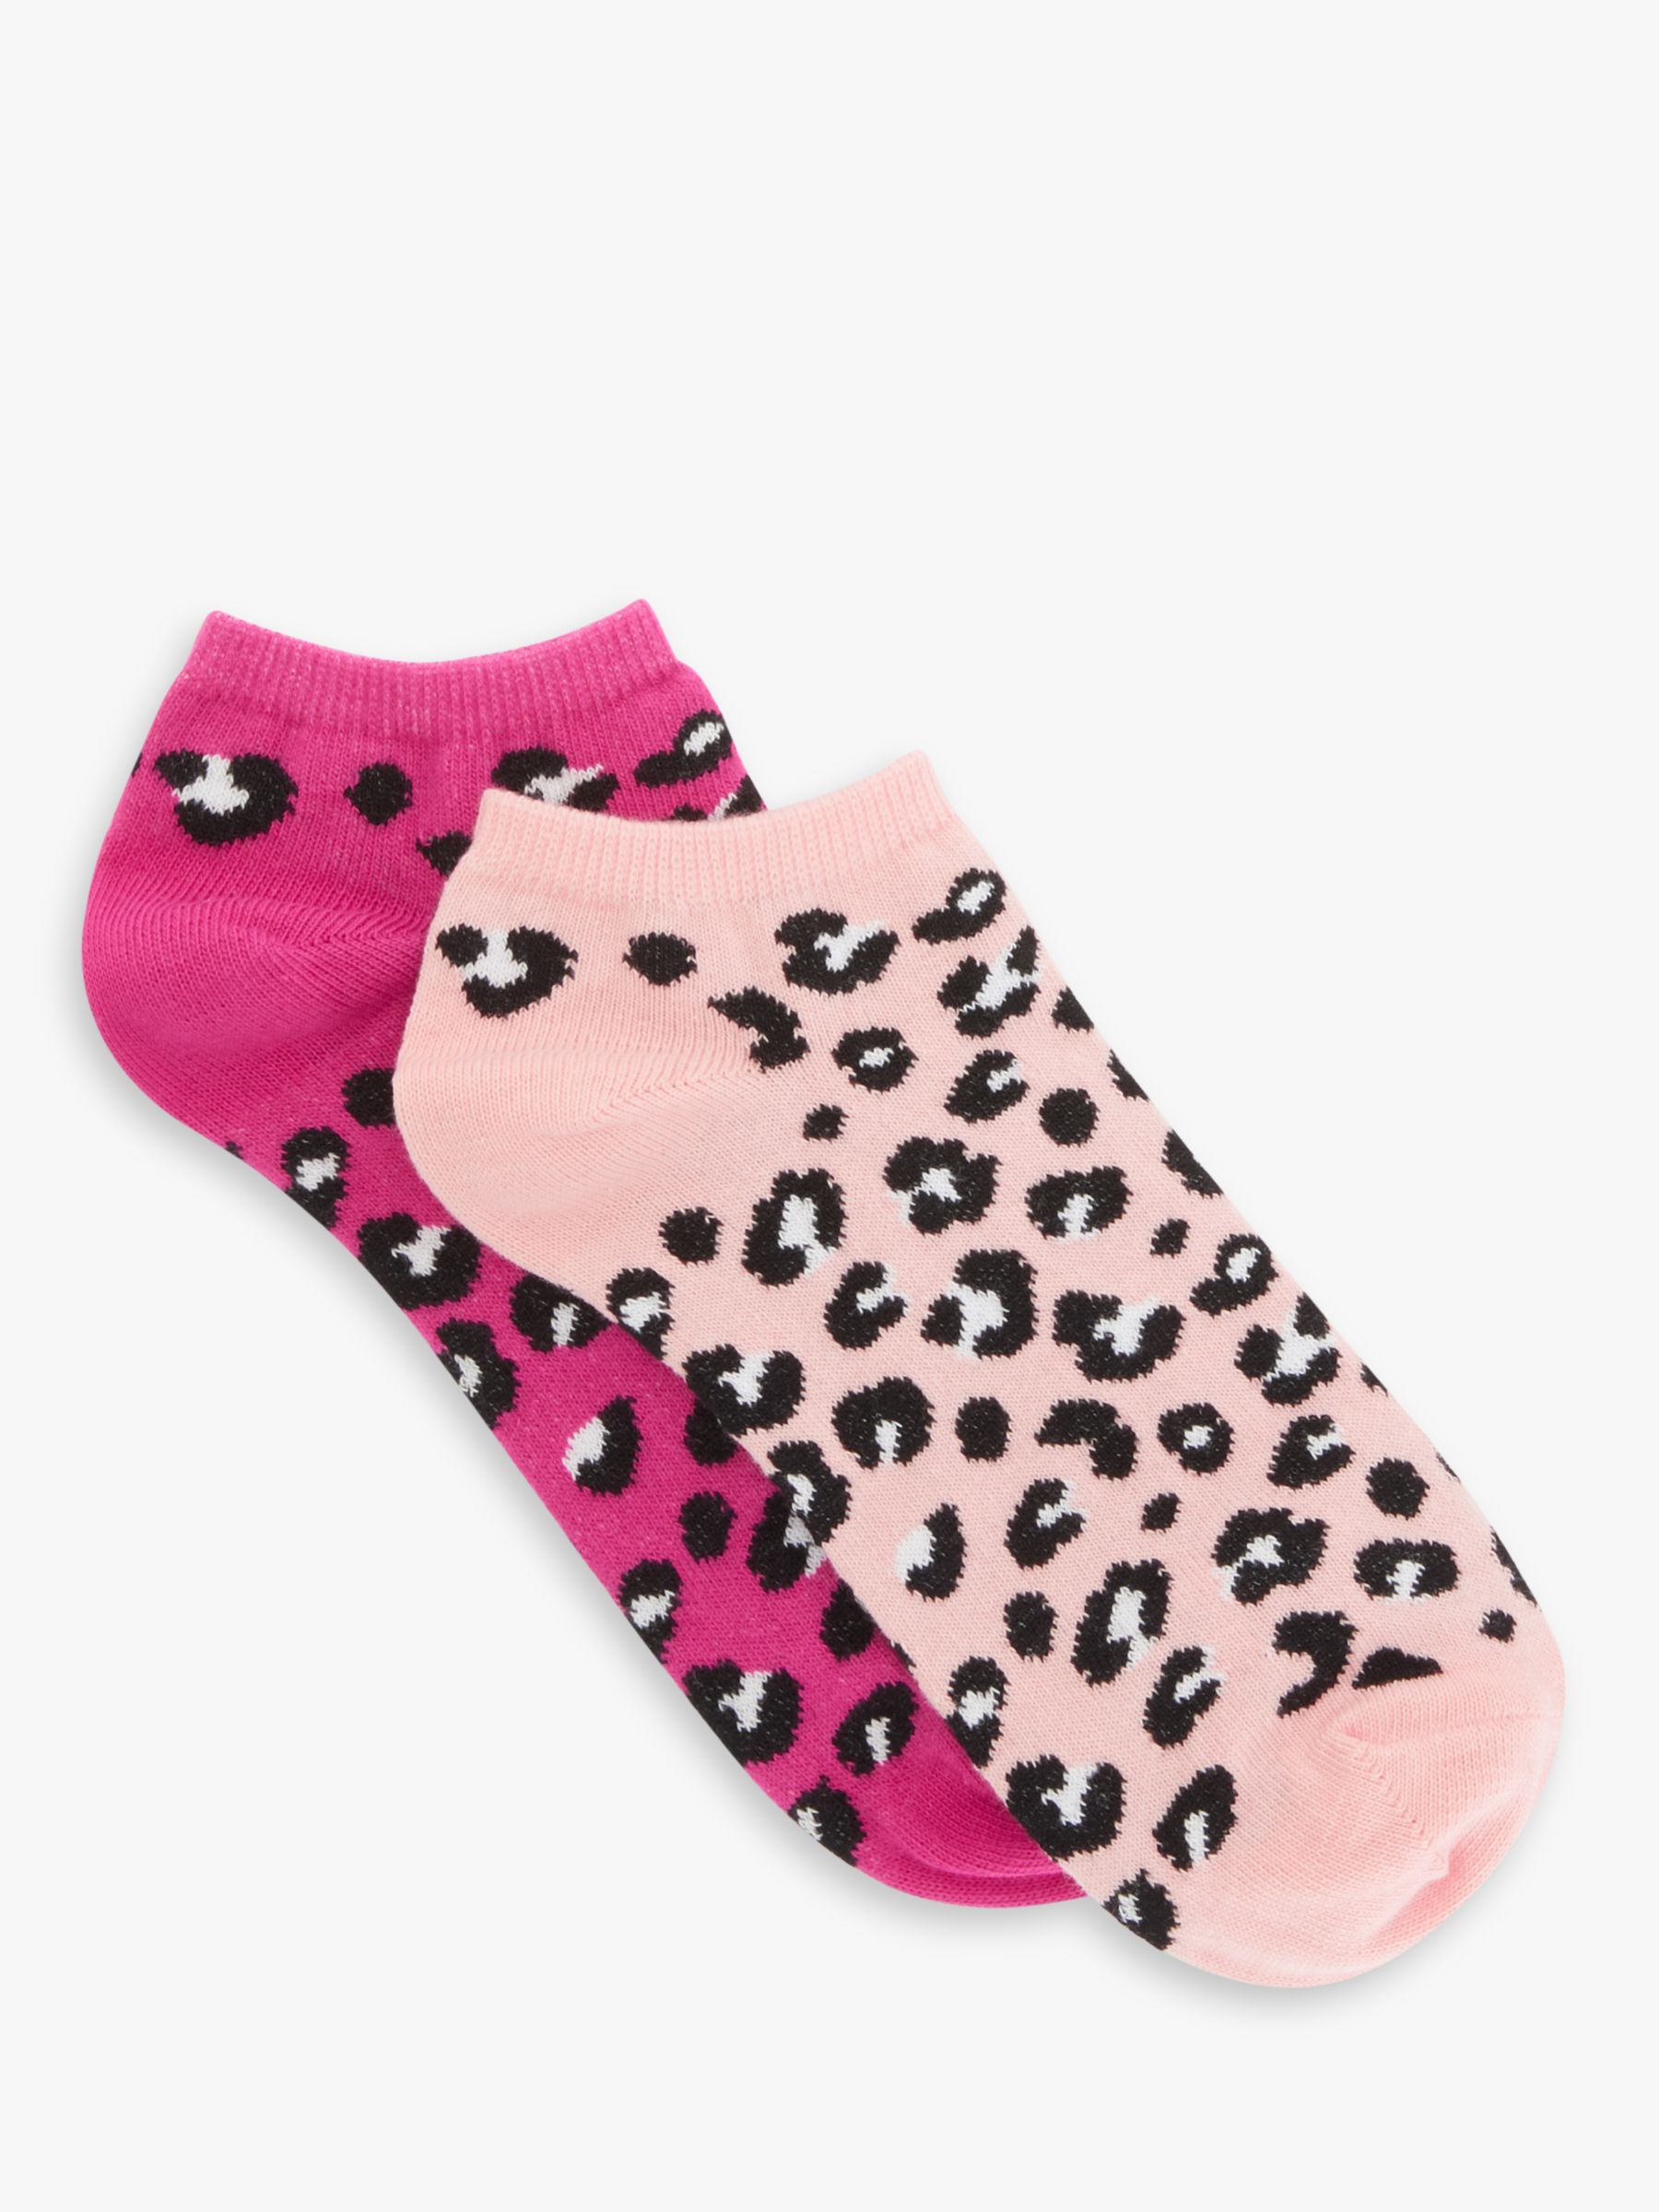 AND/OR Leopard Organic Cotton Trainer Socks, Pack of 2, Pink